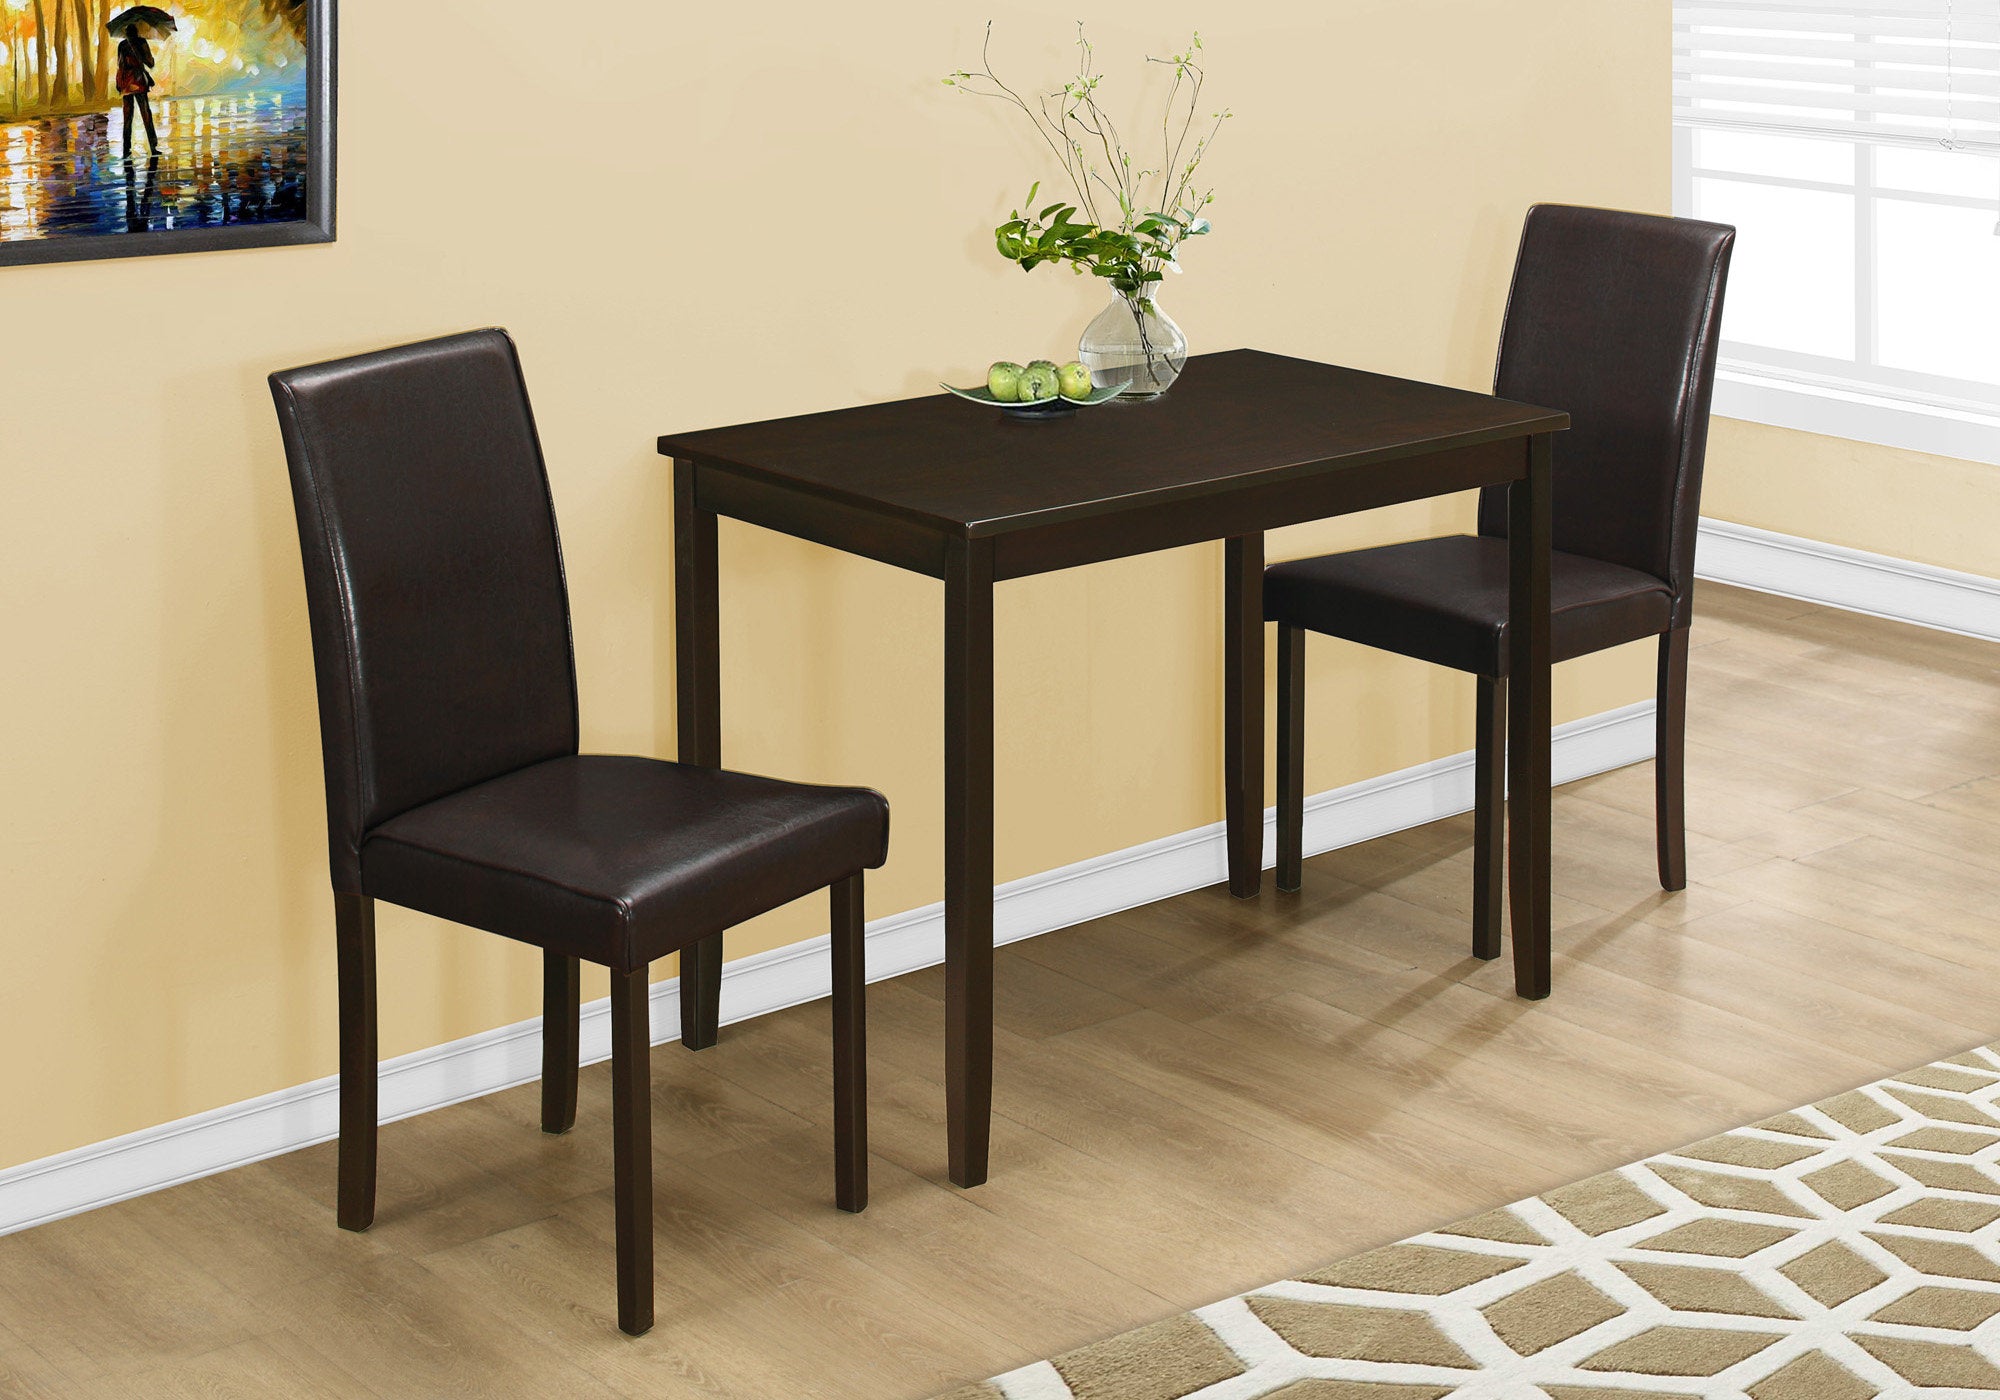 Adda Modern Home Wooden Dining Table With 2 Brown Parson Chairs Set